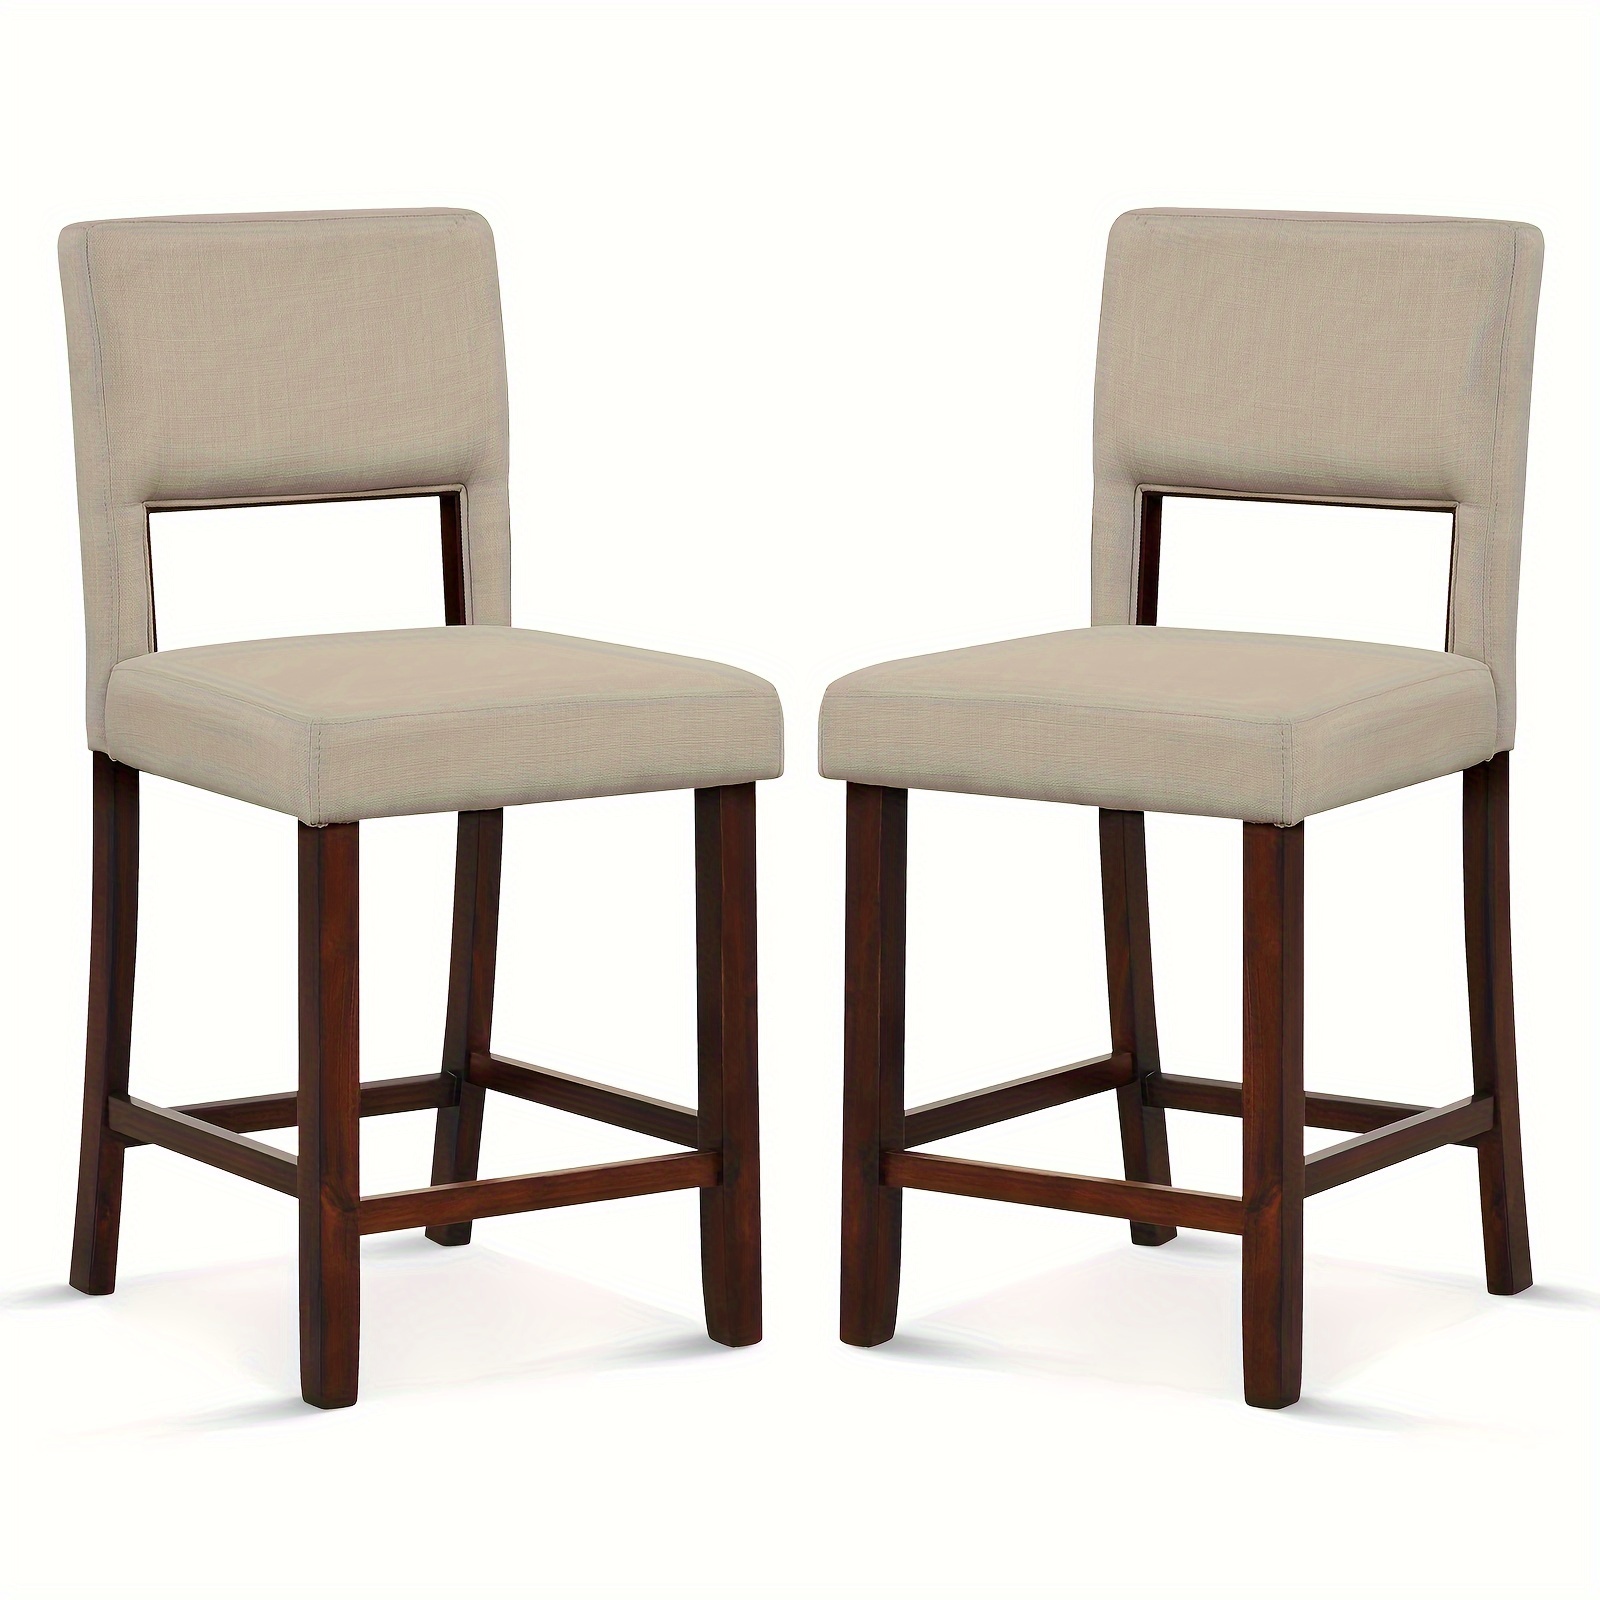 

2-pack, Stools, Beige Upholstered Linen Bar Stools, Wooden Counter Height Dining Chairs With Back Support, Sturdy Wood Construction, Modern Design For Kitchen Portable Bars Chair